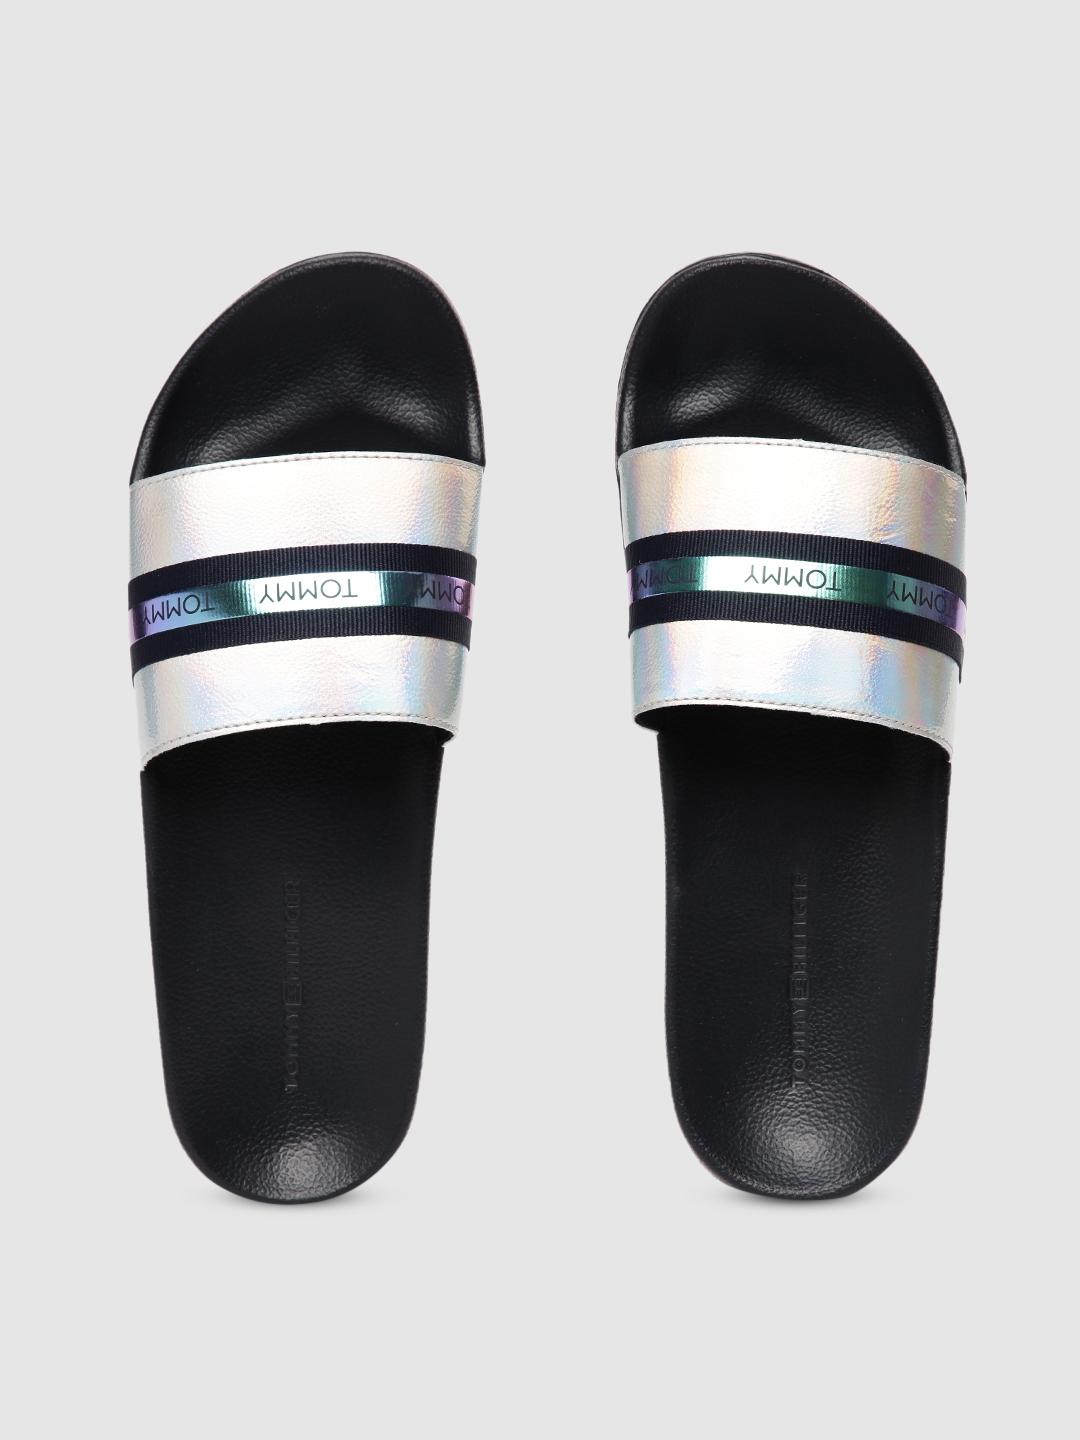 tommy sliders womens